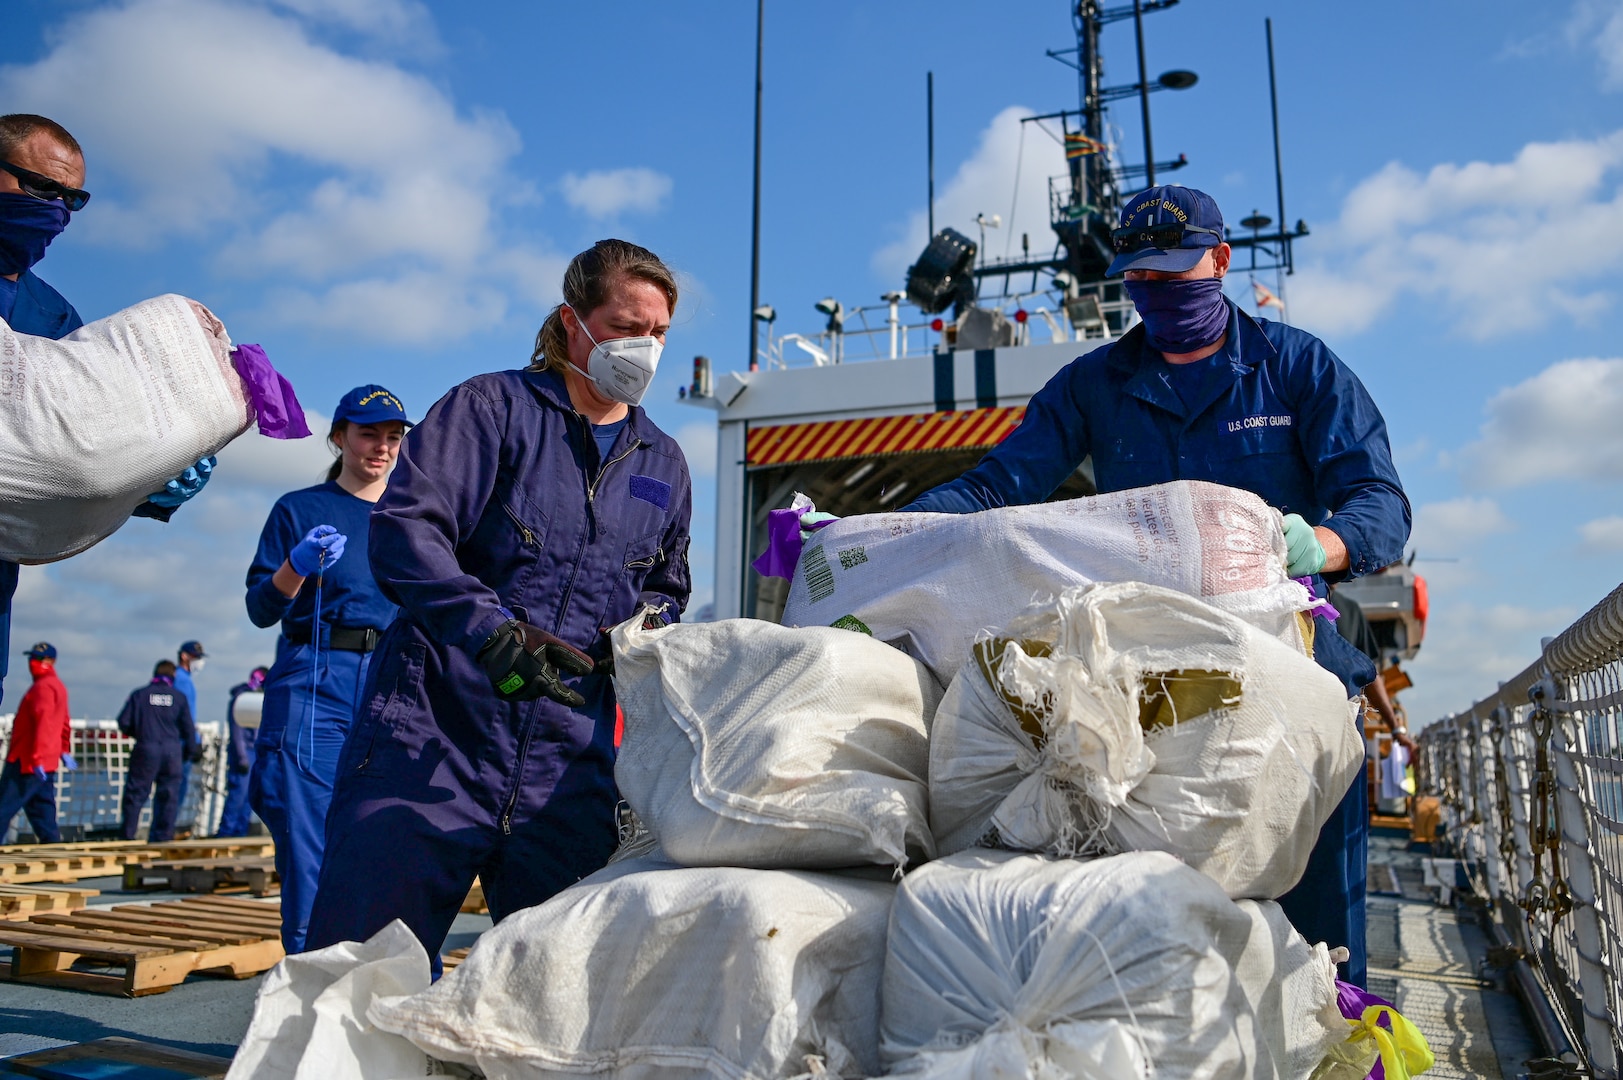 U.S. Coast Guard Cutter Mohawk (WMEC-913) crewmembers pose with approximately 18,000 pounds of illegal narcotics at Port Everglades in Fort Lauderdale, Florida, May 10, 2025. The Mohawk is homeported in Key West, Florida. (U.S. Coast Guard photo by Petty Officer 2nd Class Ryan Estrada)